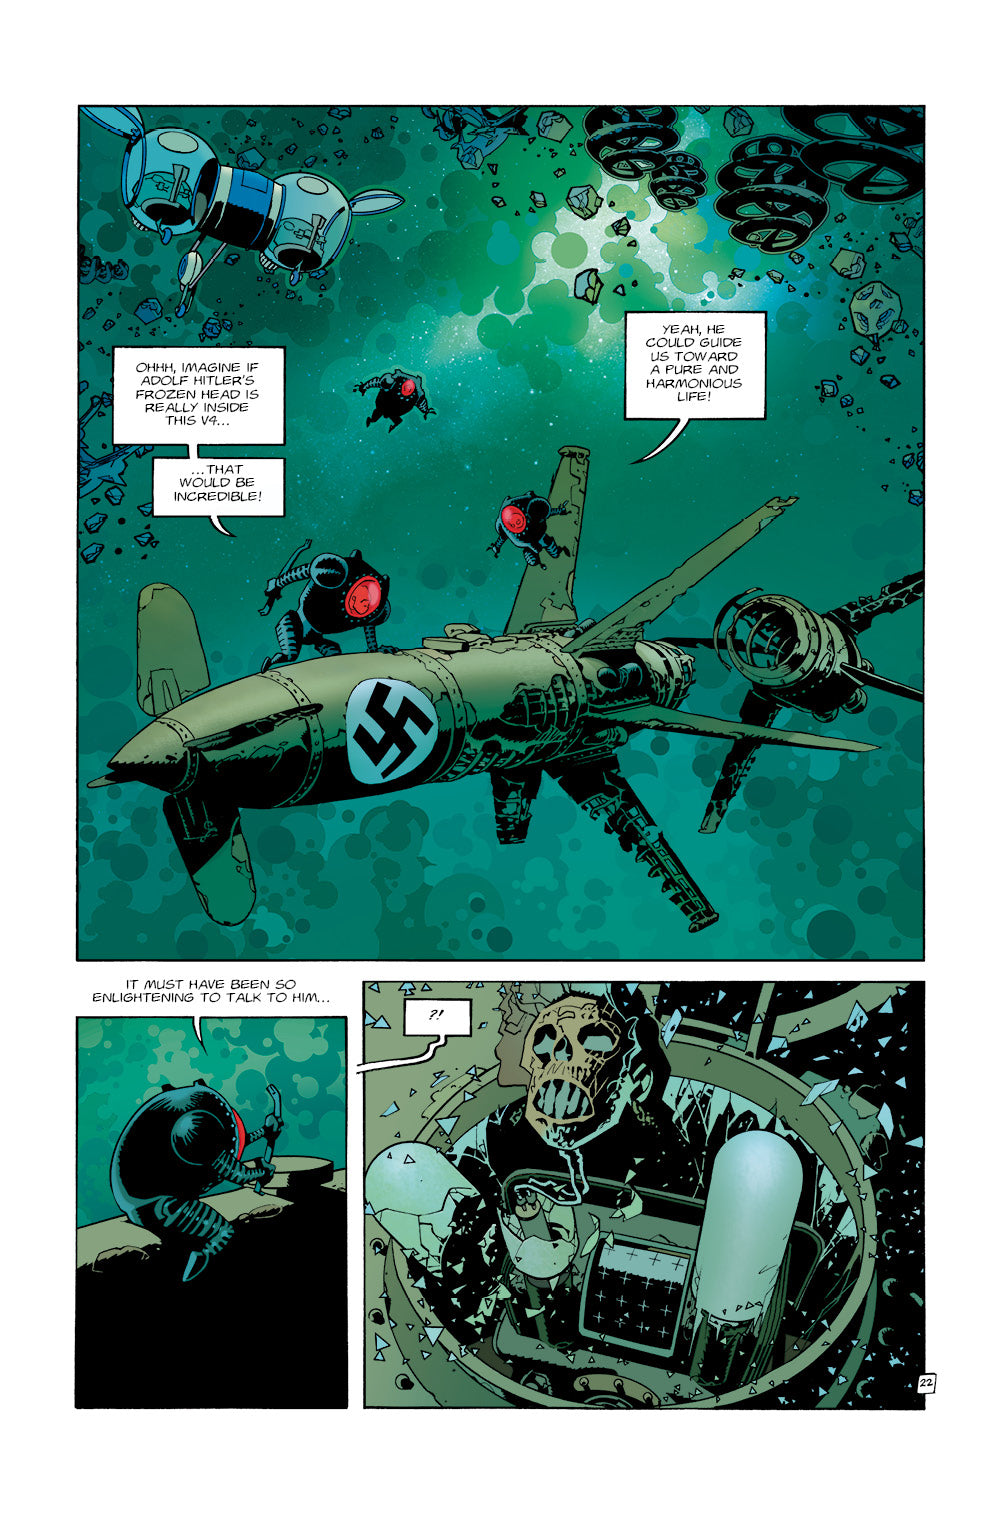 INFINITY 8 vol. 2: BACK TO THE FUHRER, by Lewis Trondheim and Olivier Vatine